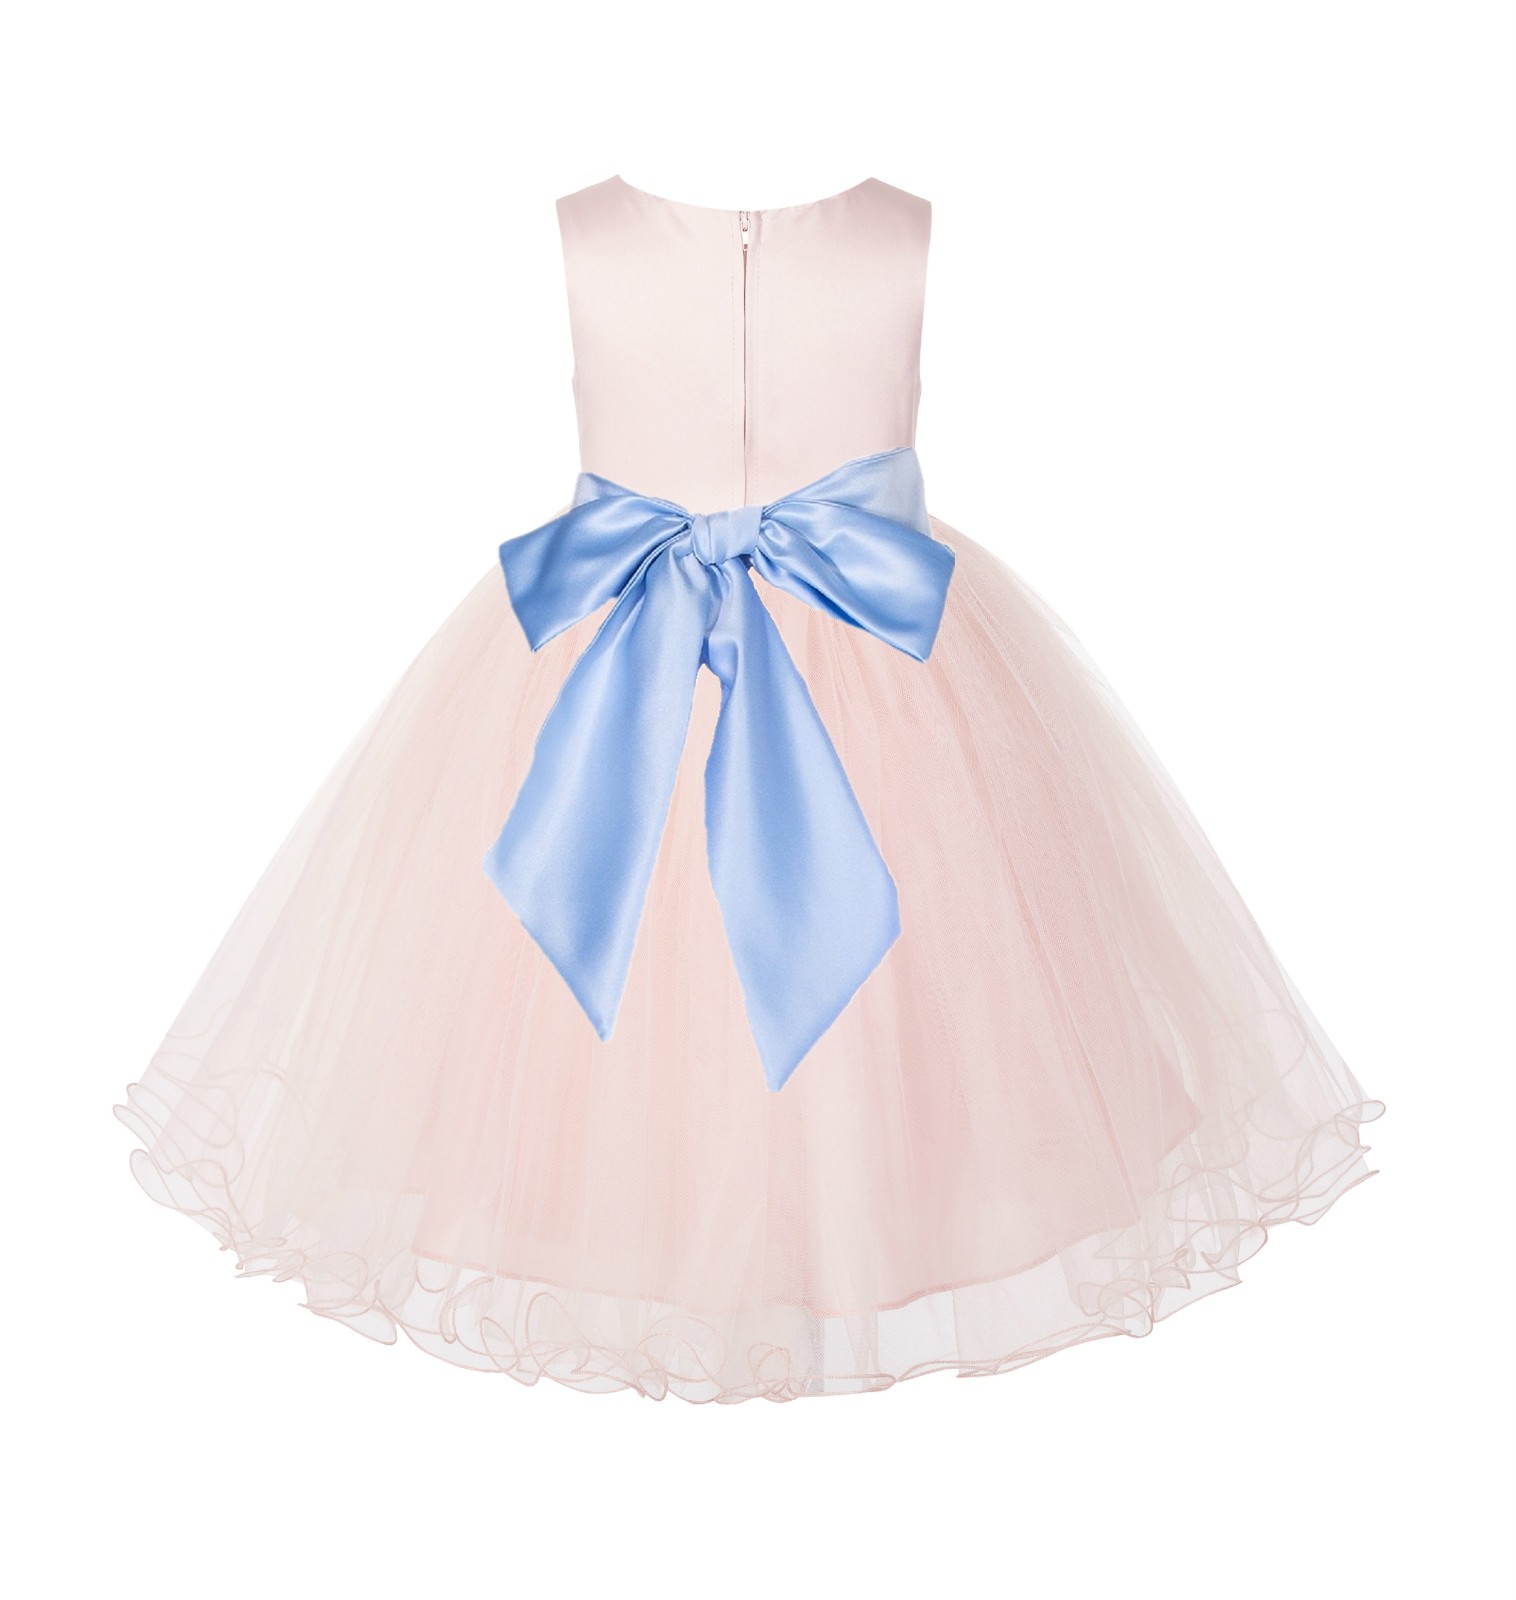 Blush Pink / Ice blue Tulle Rattail Edge Flower Girl Dress Pageant Recital 829S